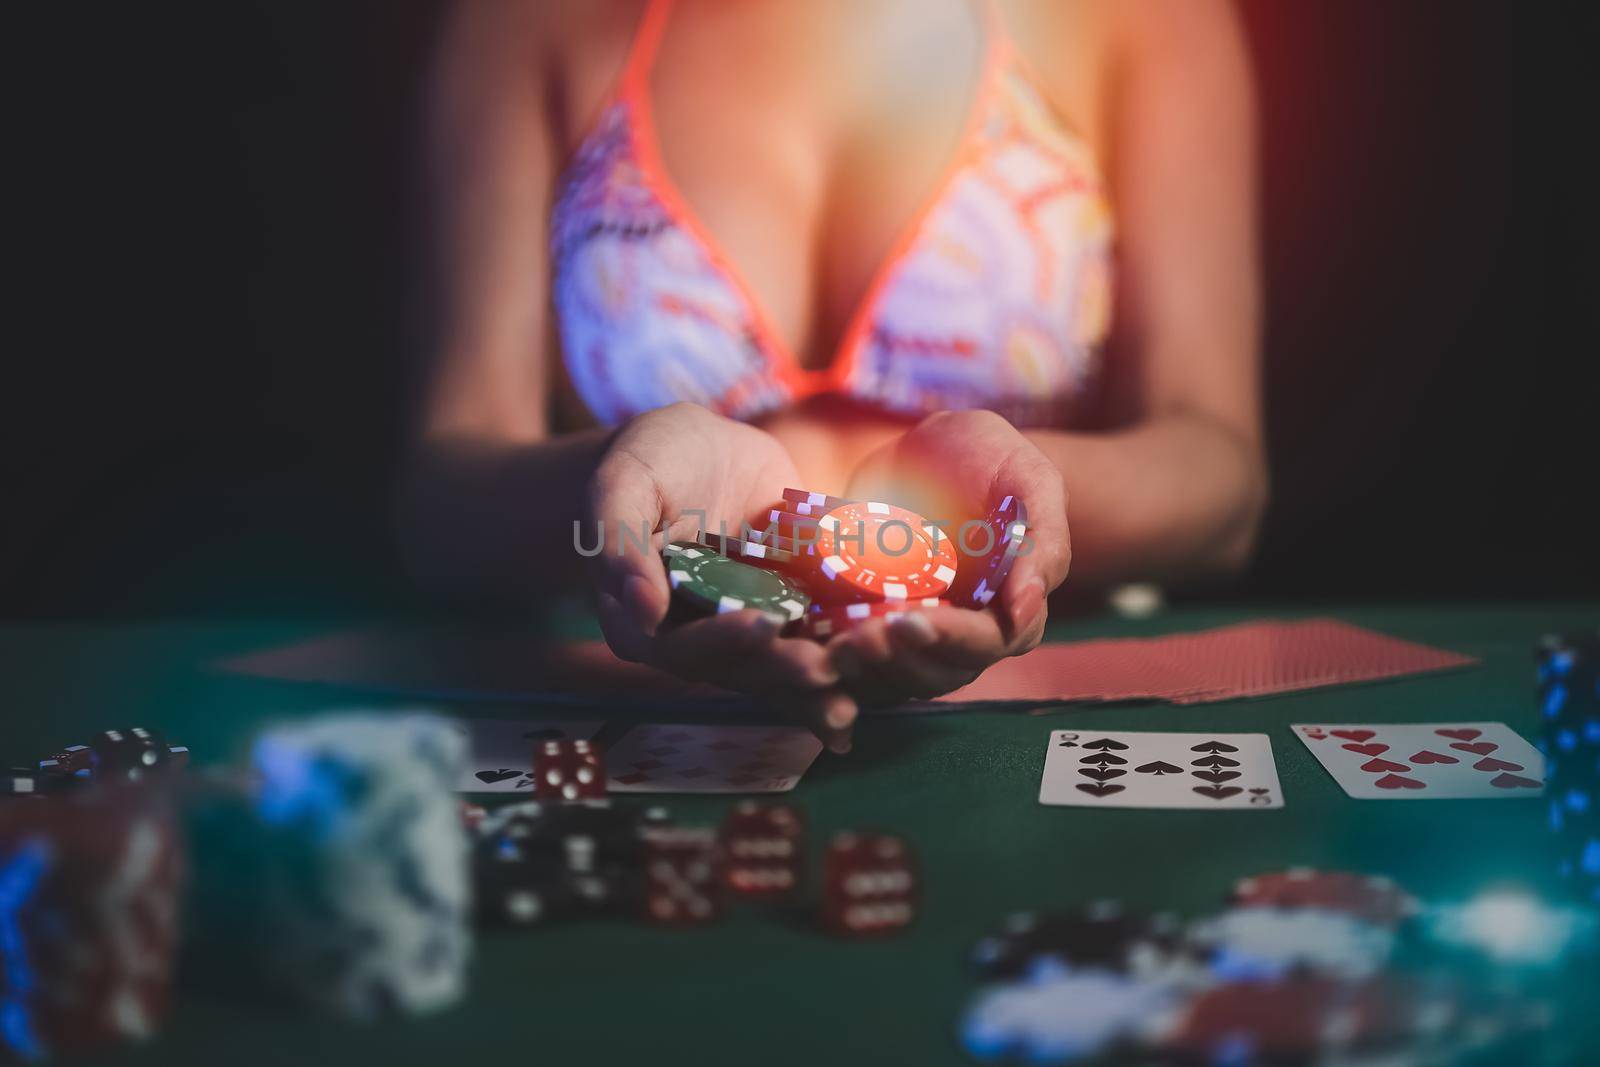 Woman wearing bikini dealer or croupier shuffles poker cards in a casino on the background of a table,asain woman holding chips. Casino, poker, poker game concept by Wmpix